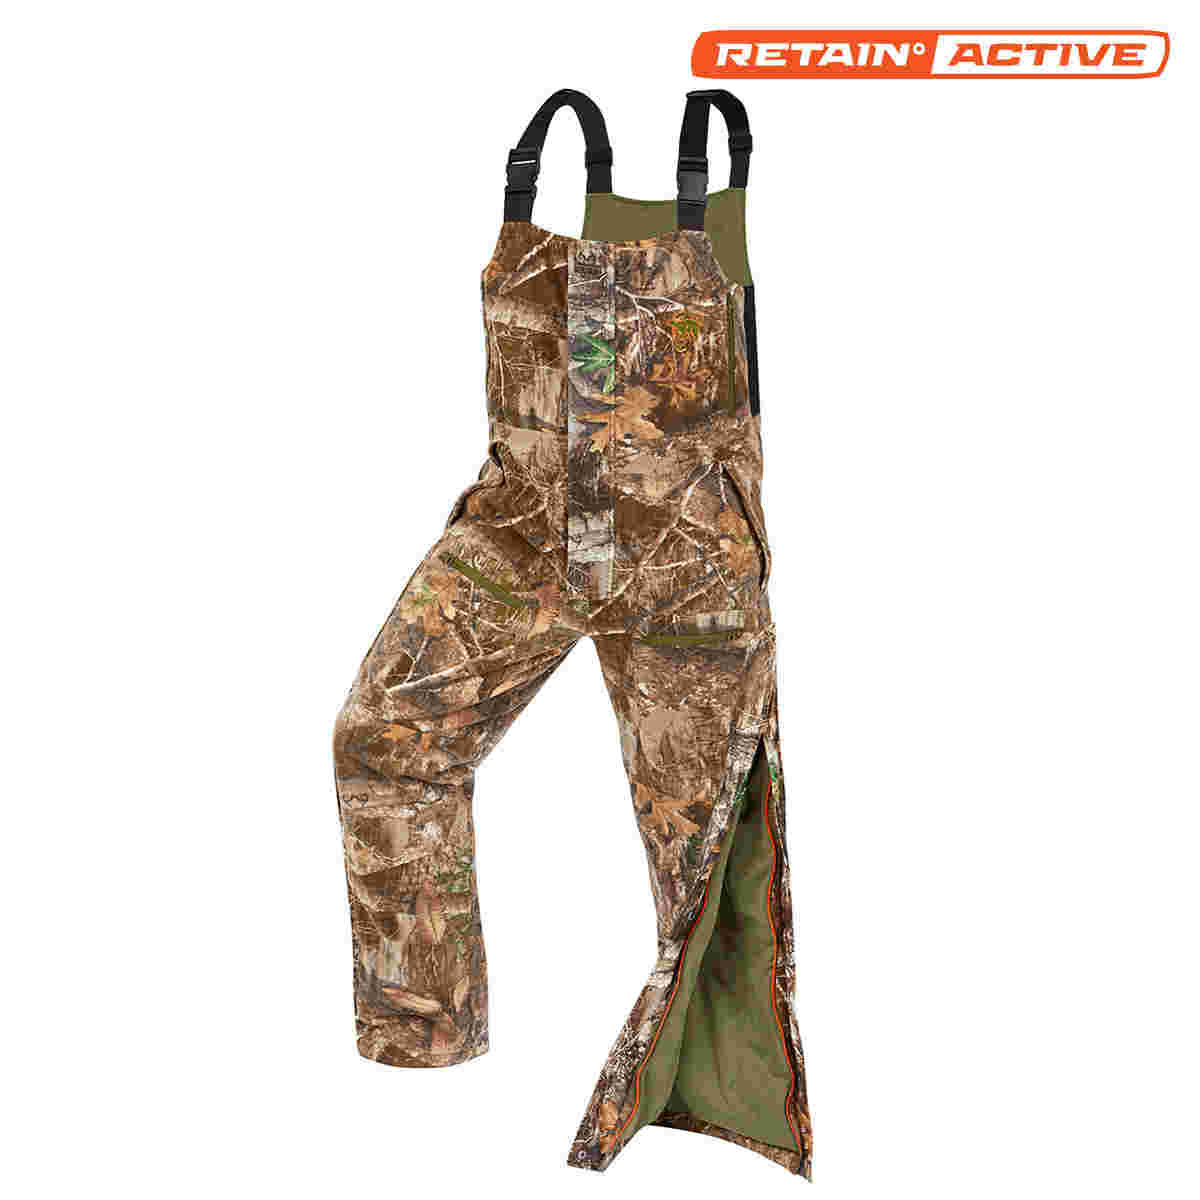 | Outerwear EDGE® ArcticShield - Hunting FLEECE Systems and BALACLAVA Collections SHERPA REALTREE